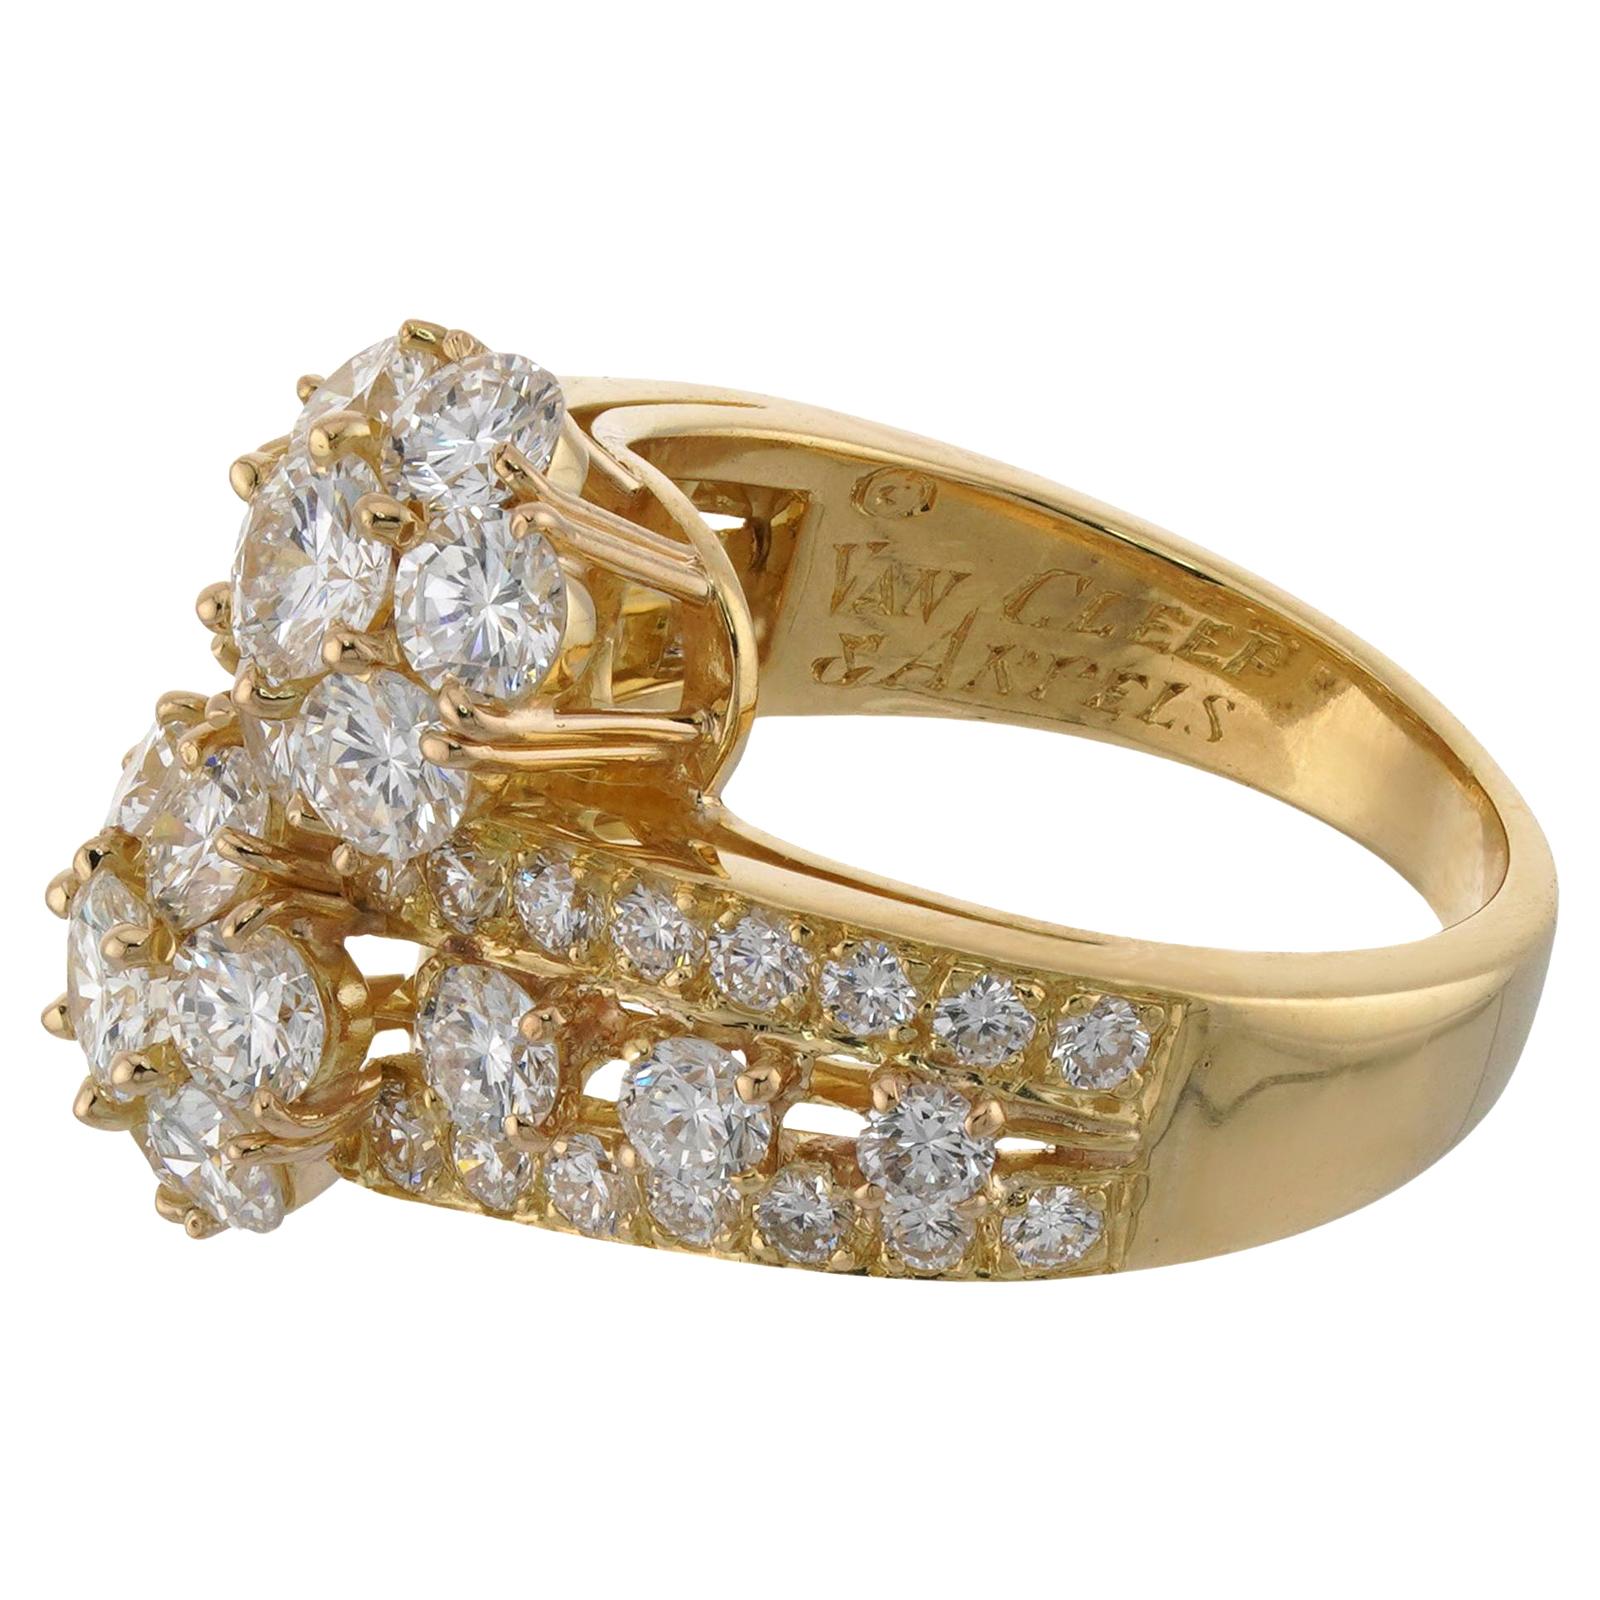 Women's VAN CLEEF & ARPELS Snowflake 18k Yellow Gold Diamond Ring Size 5 For Sale